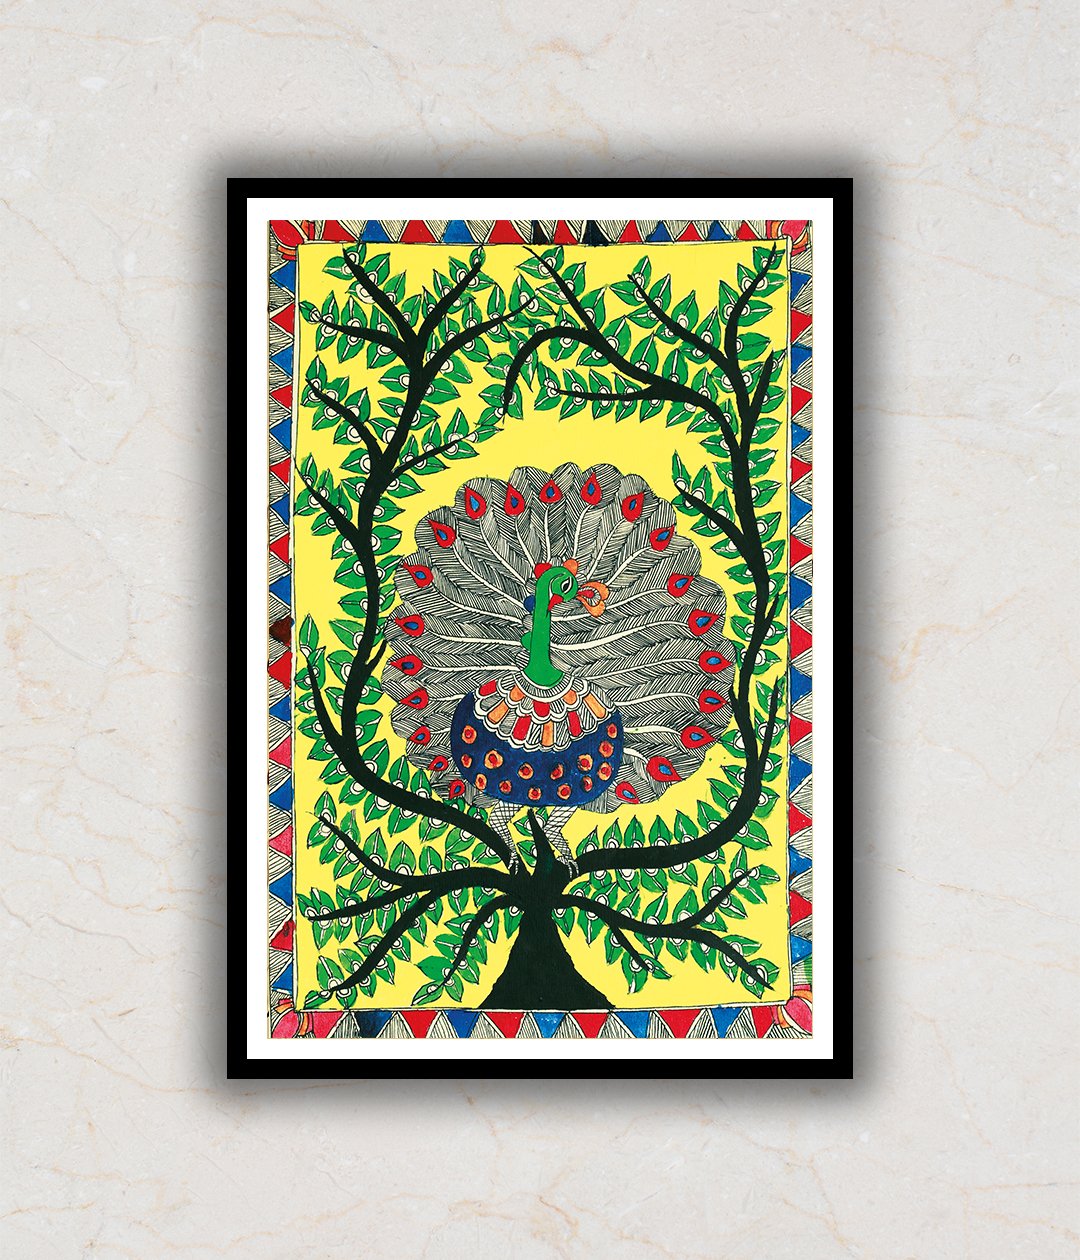 Peacock Spreading Wings Madhubani Art Painting For Home Wall Art Decor